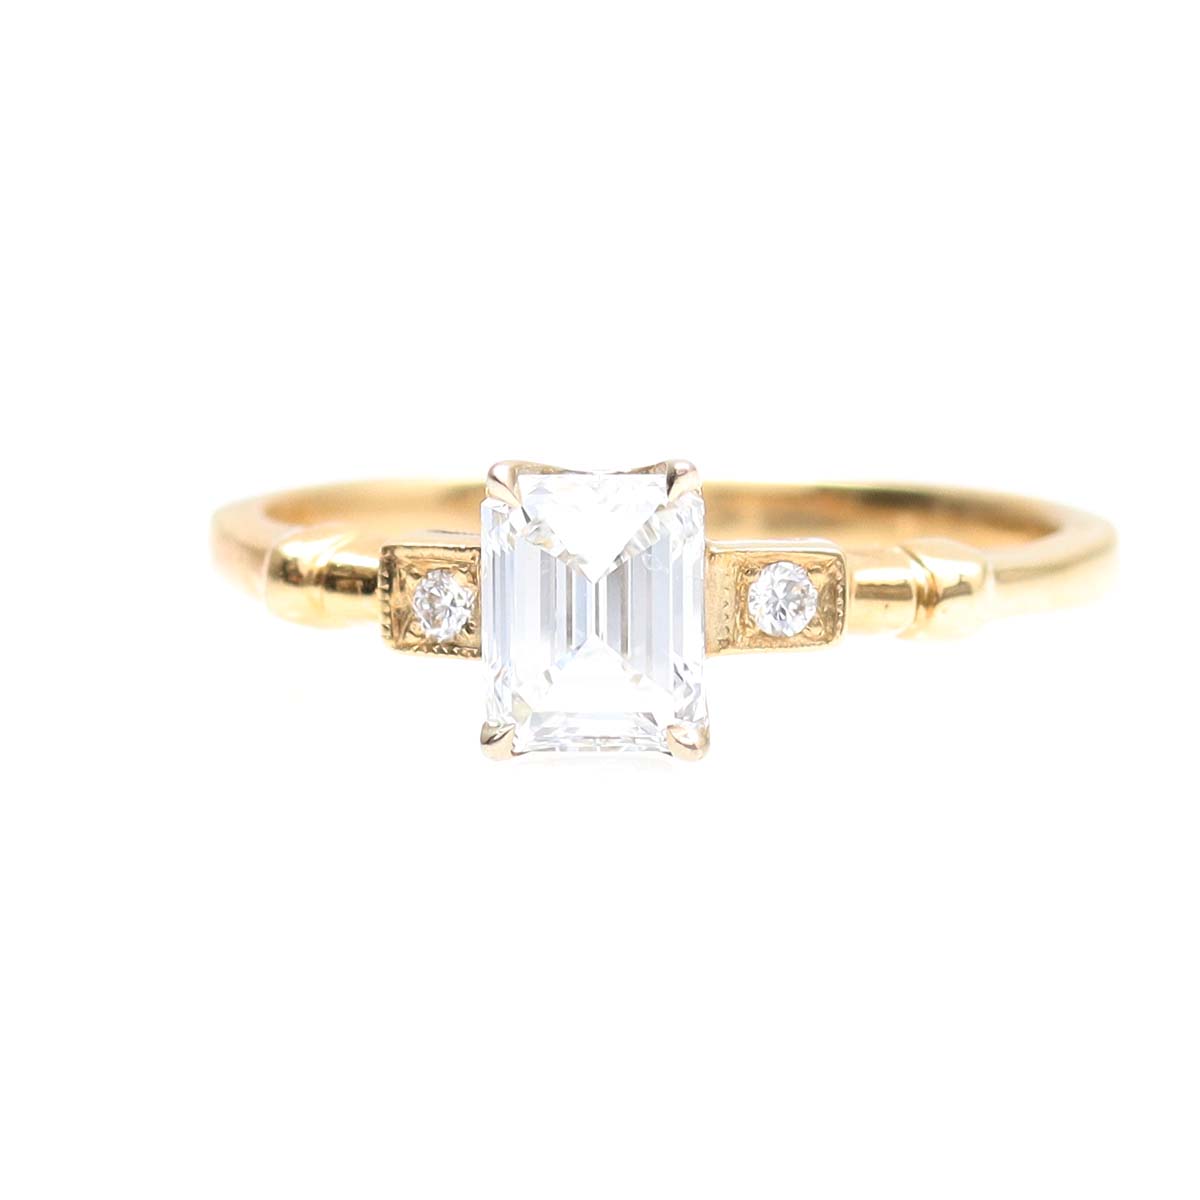 The Esther Emerald Cut Diamond Engagement Ring #3611-1